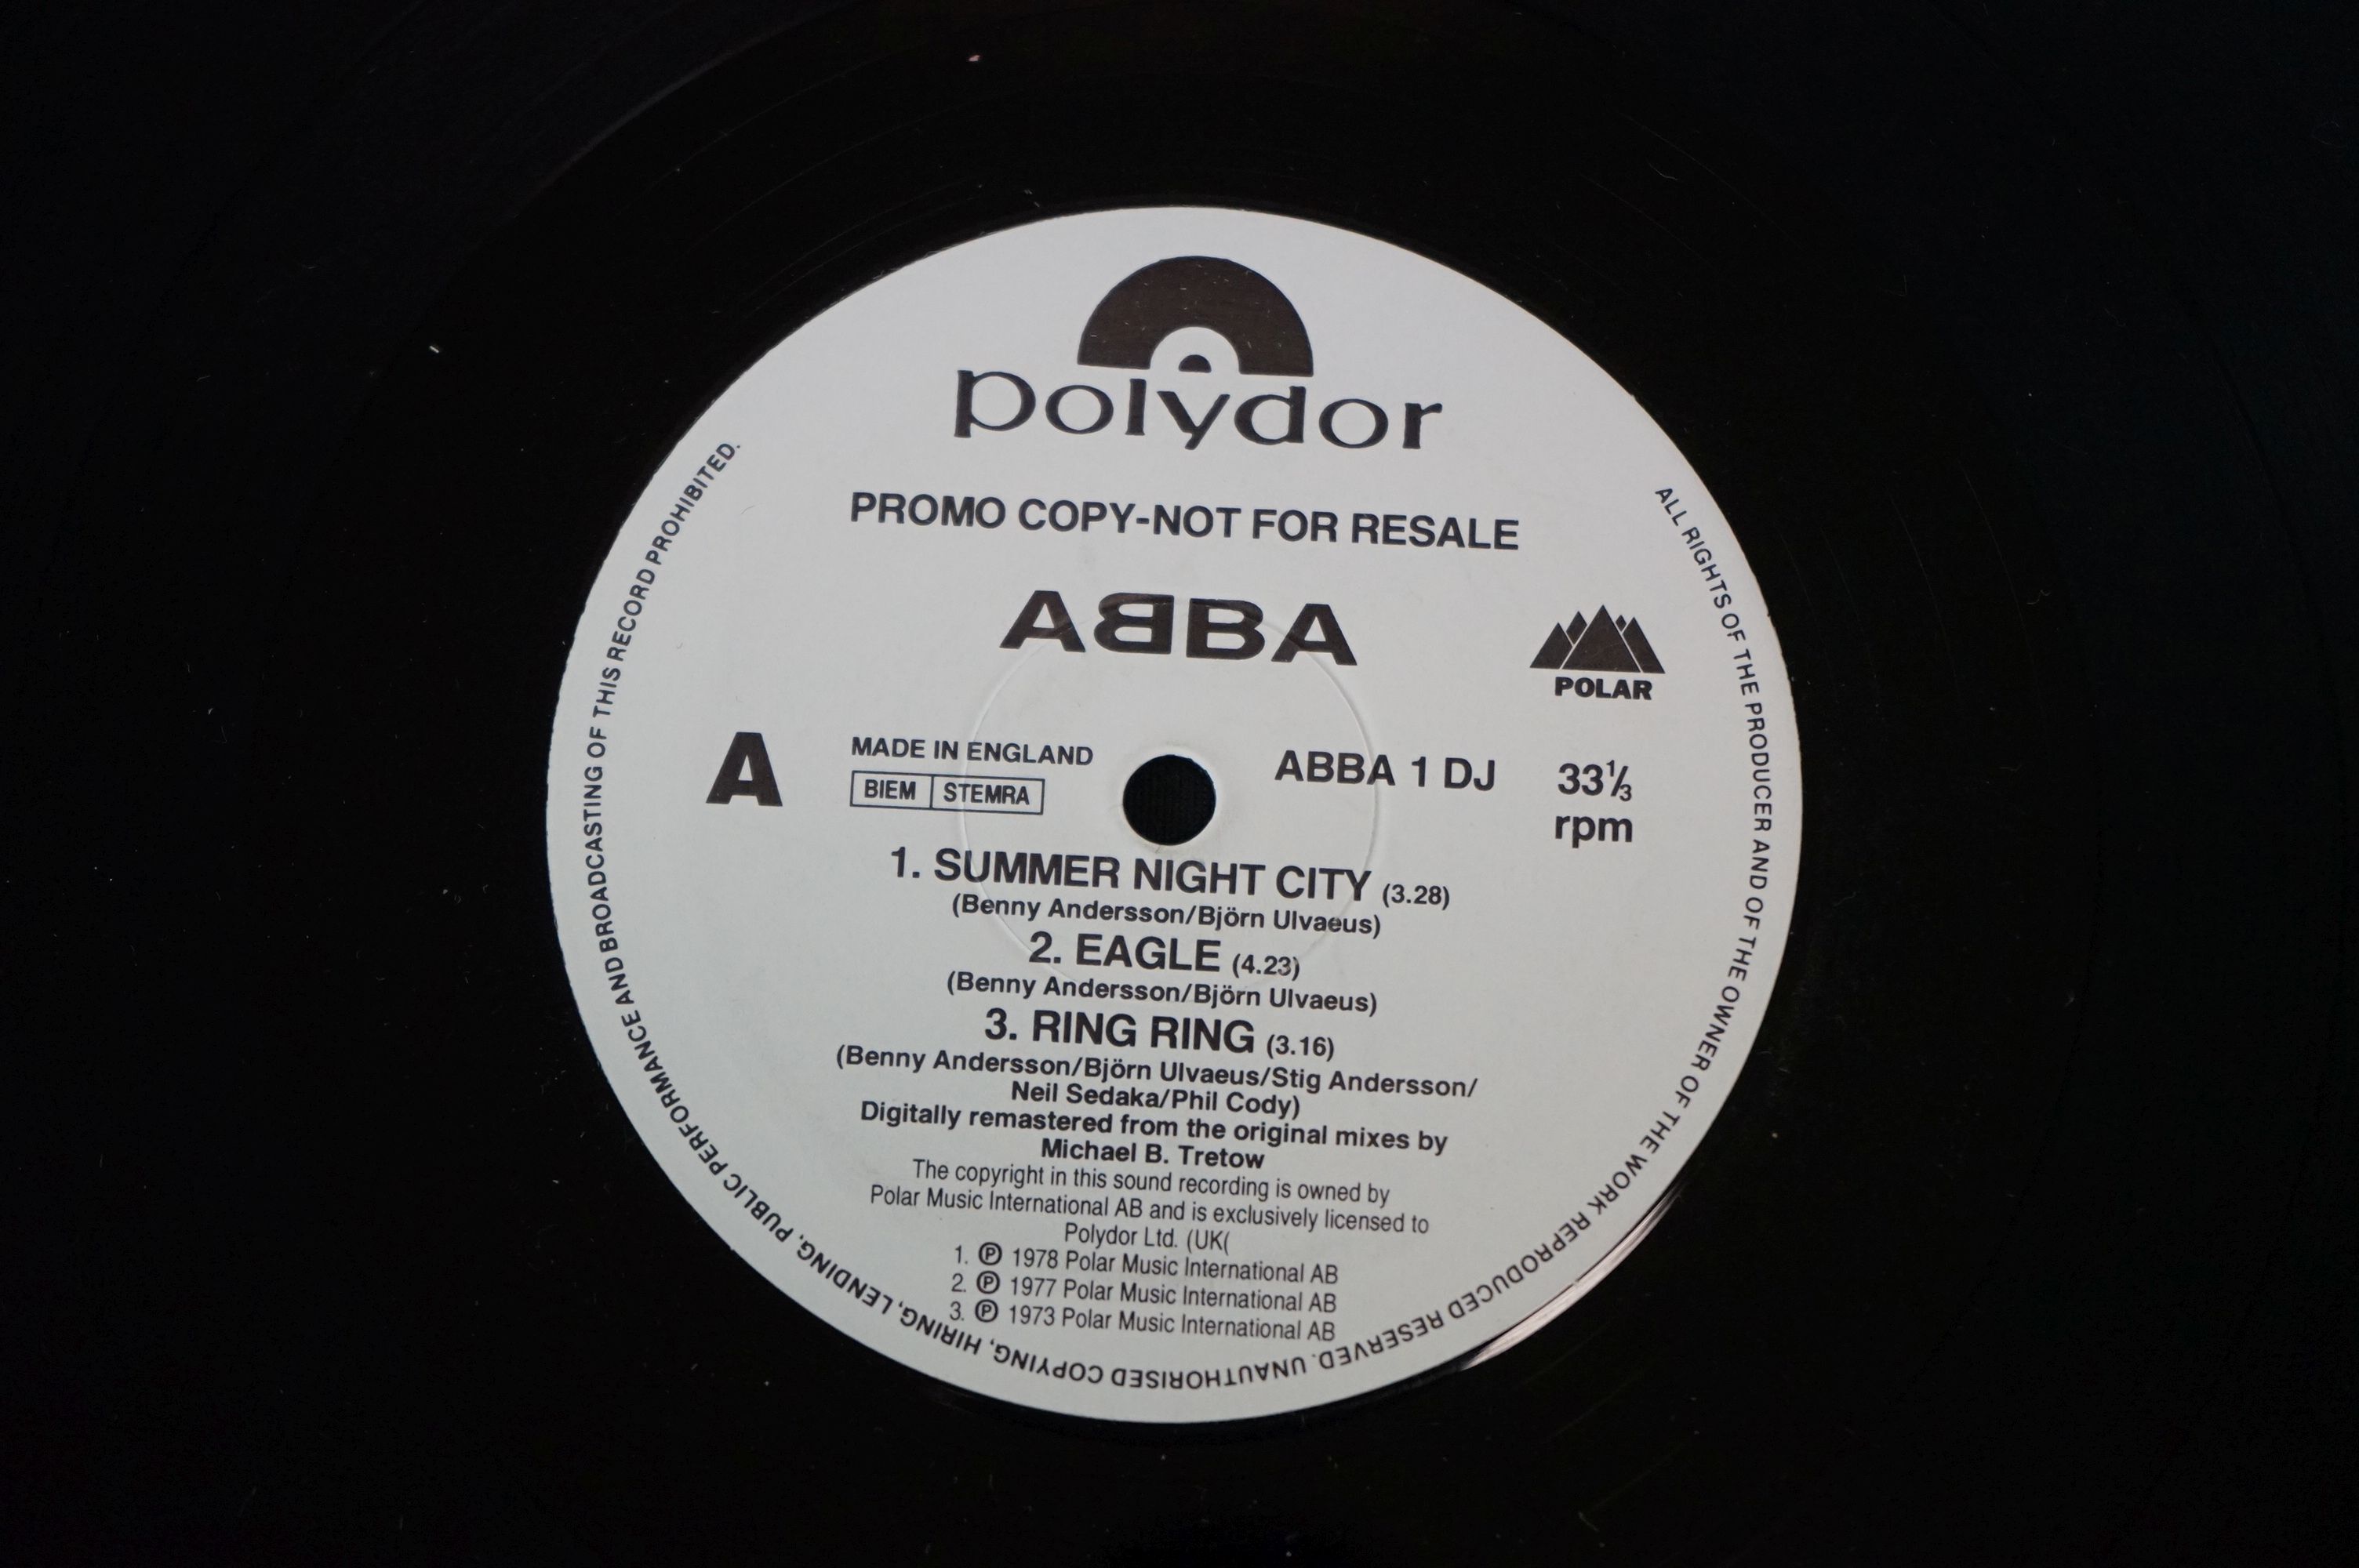 Vinyl - Abba - Promo only one sided 3 tracks 1993 UK 12? (ABBA 1DJ). EX+ (Unplayed) - Image 4 of 5